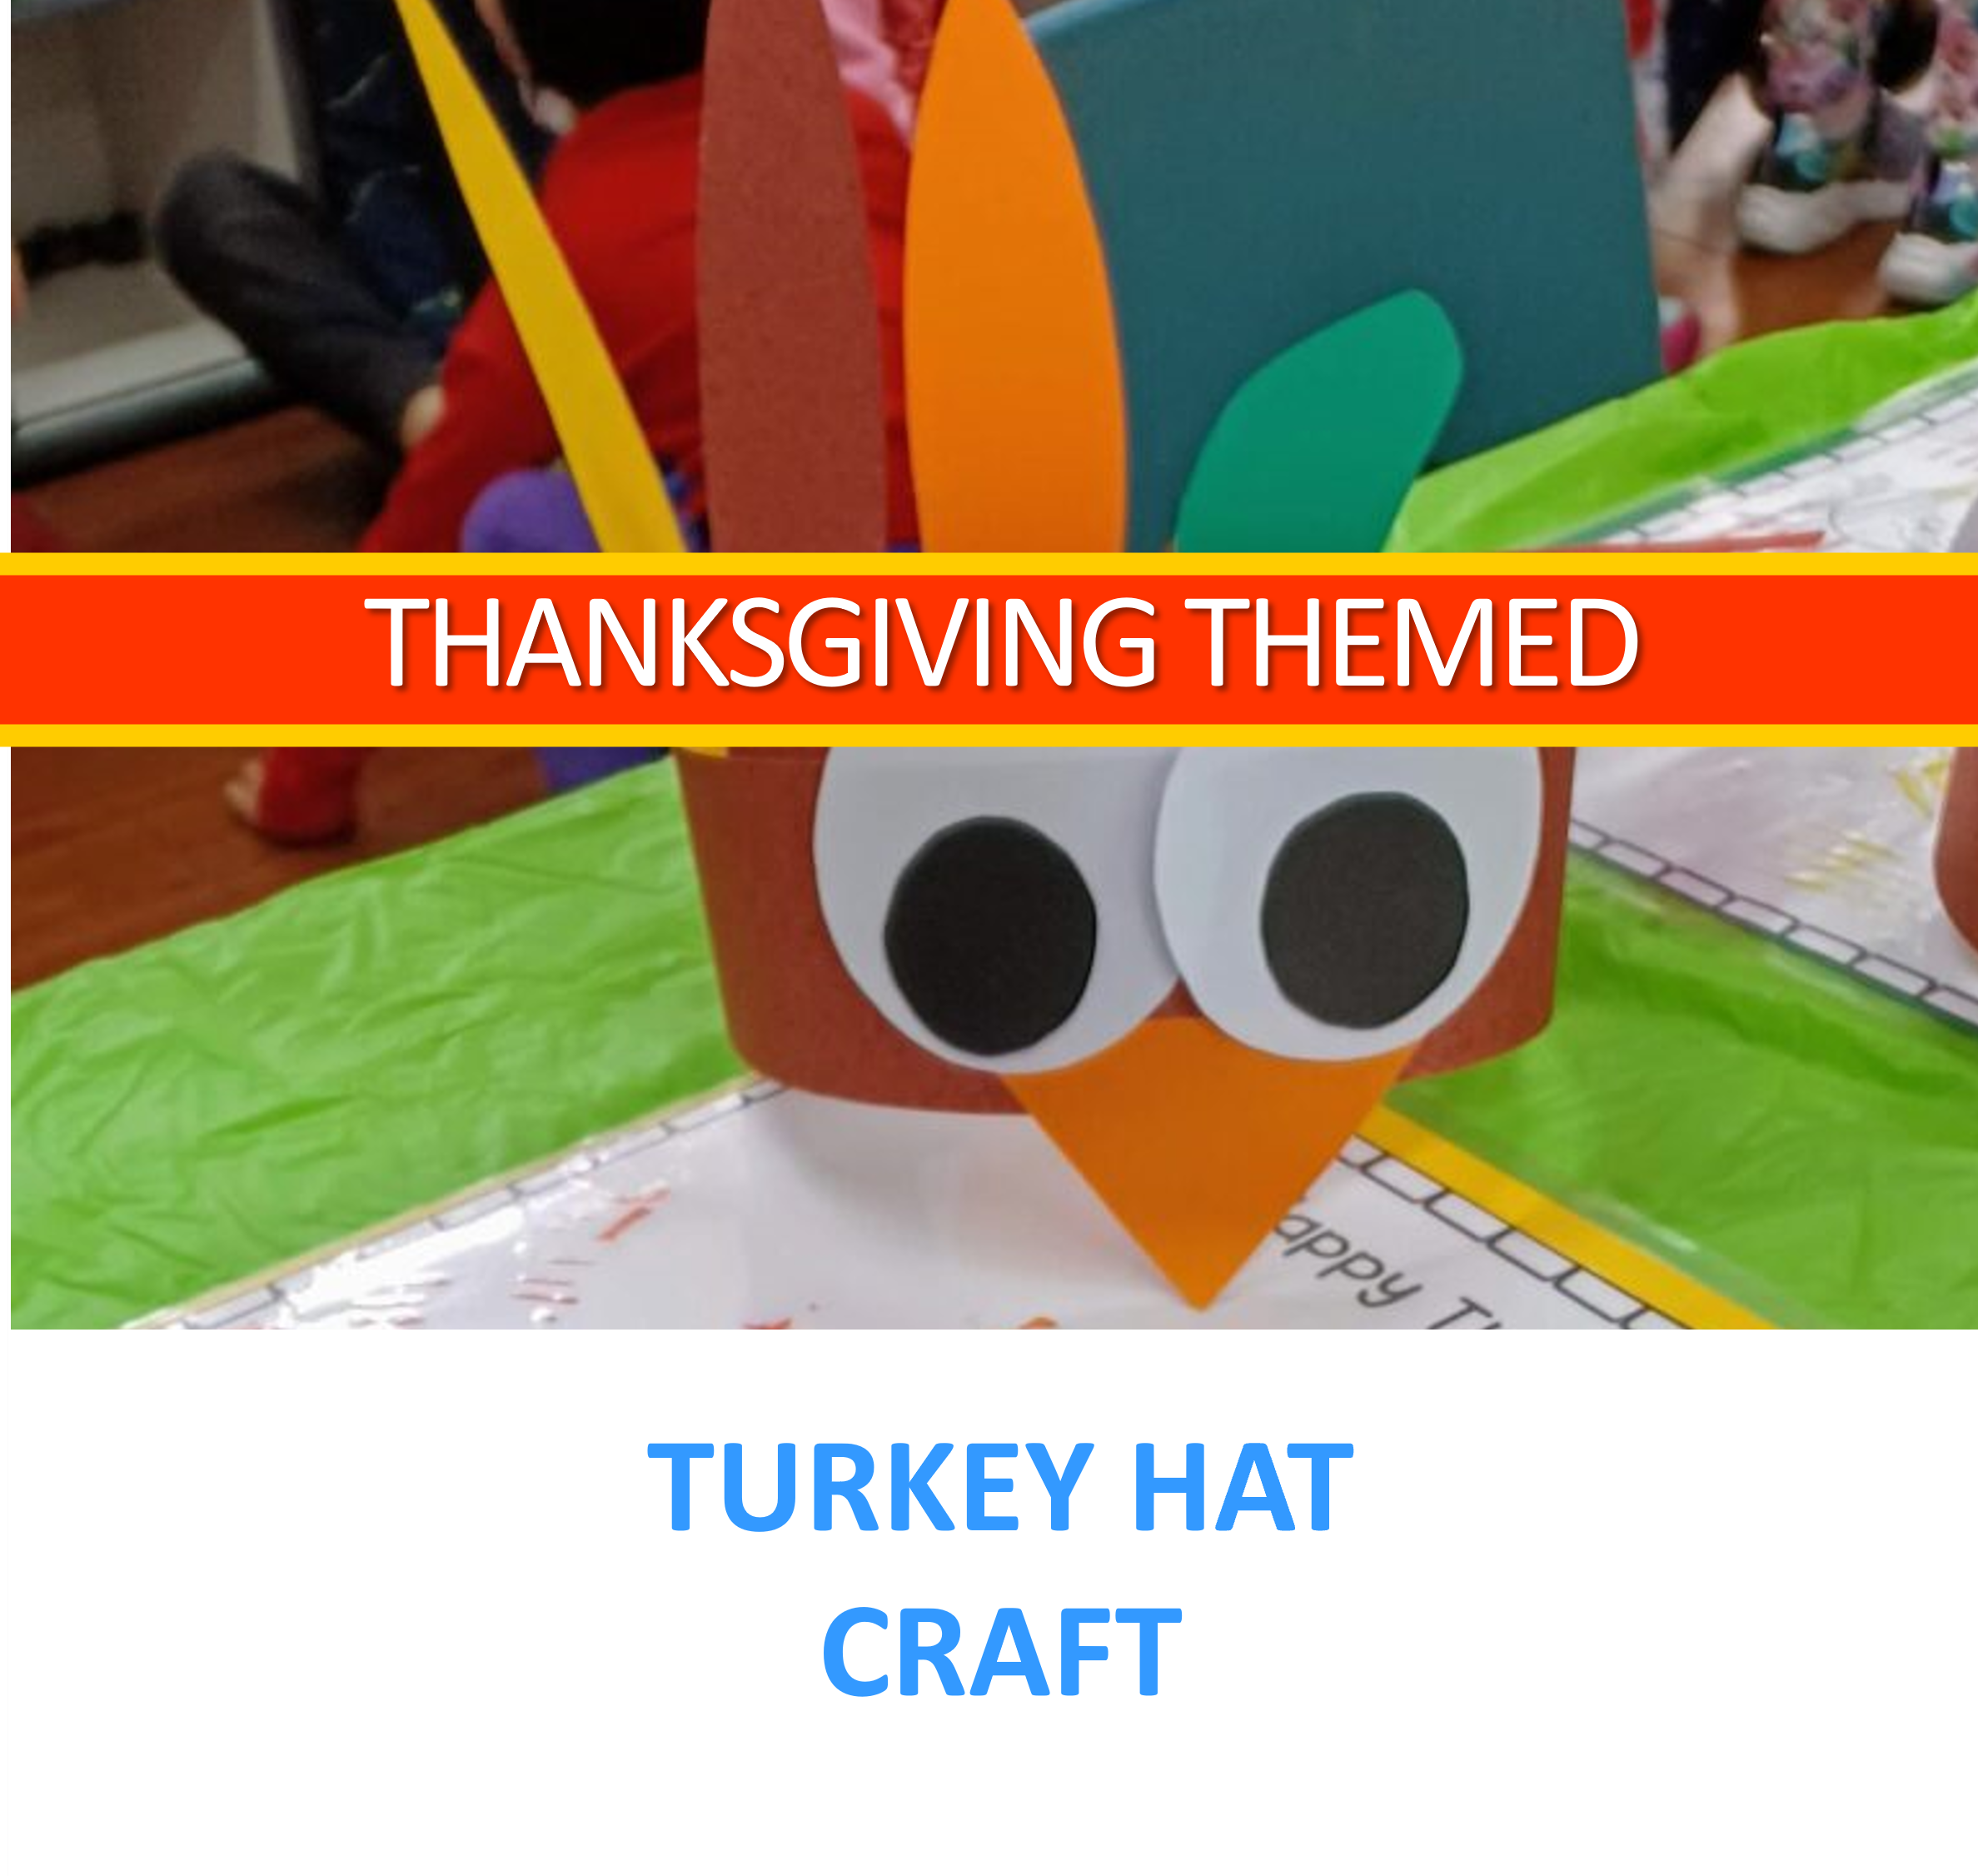 Thanksgiving themed activities